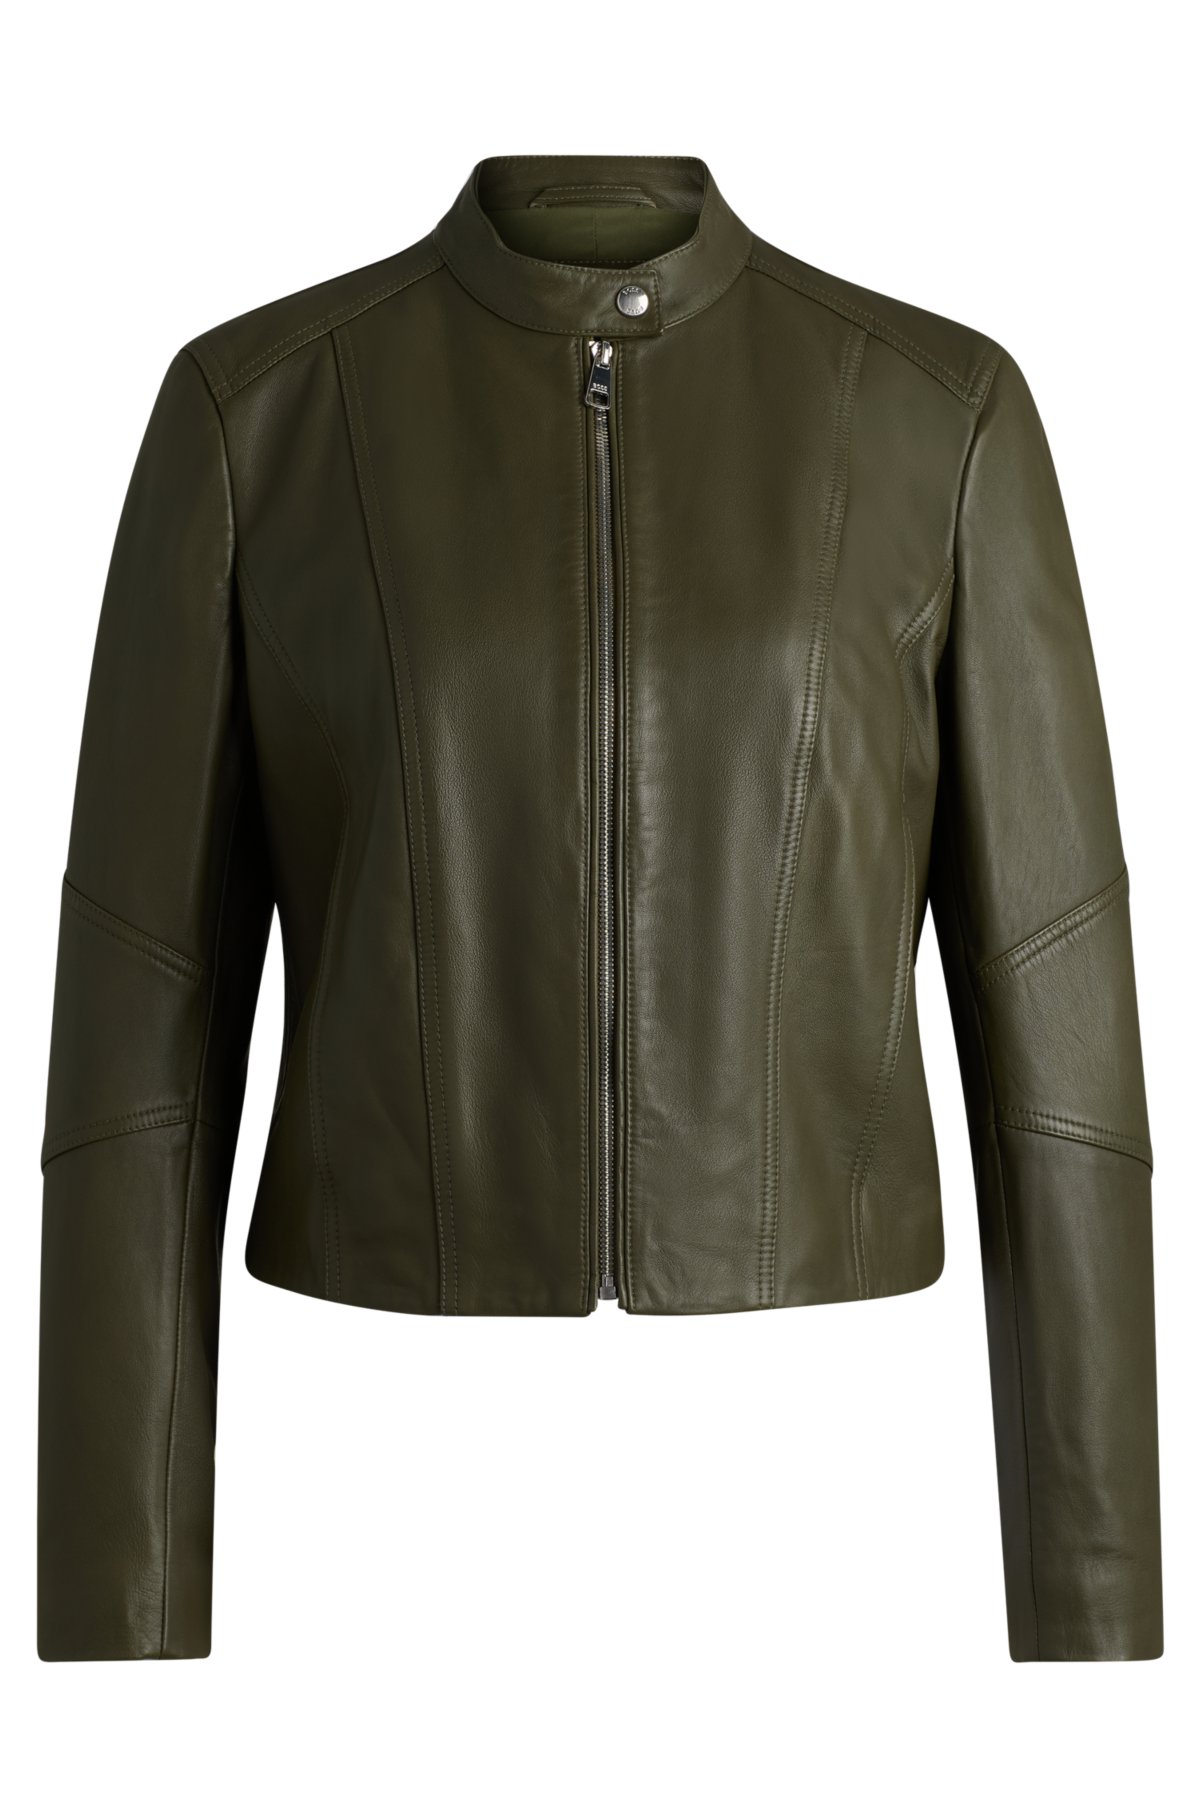 Regular-fit jacket in grained leather, Dark Green